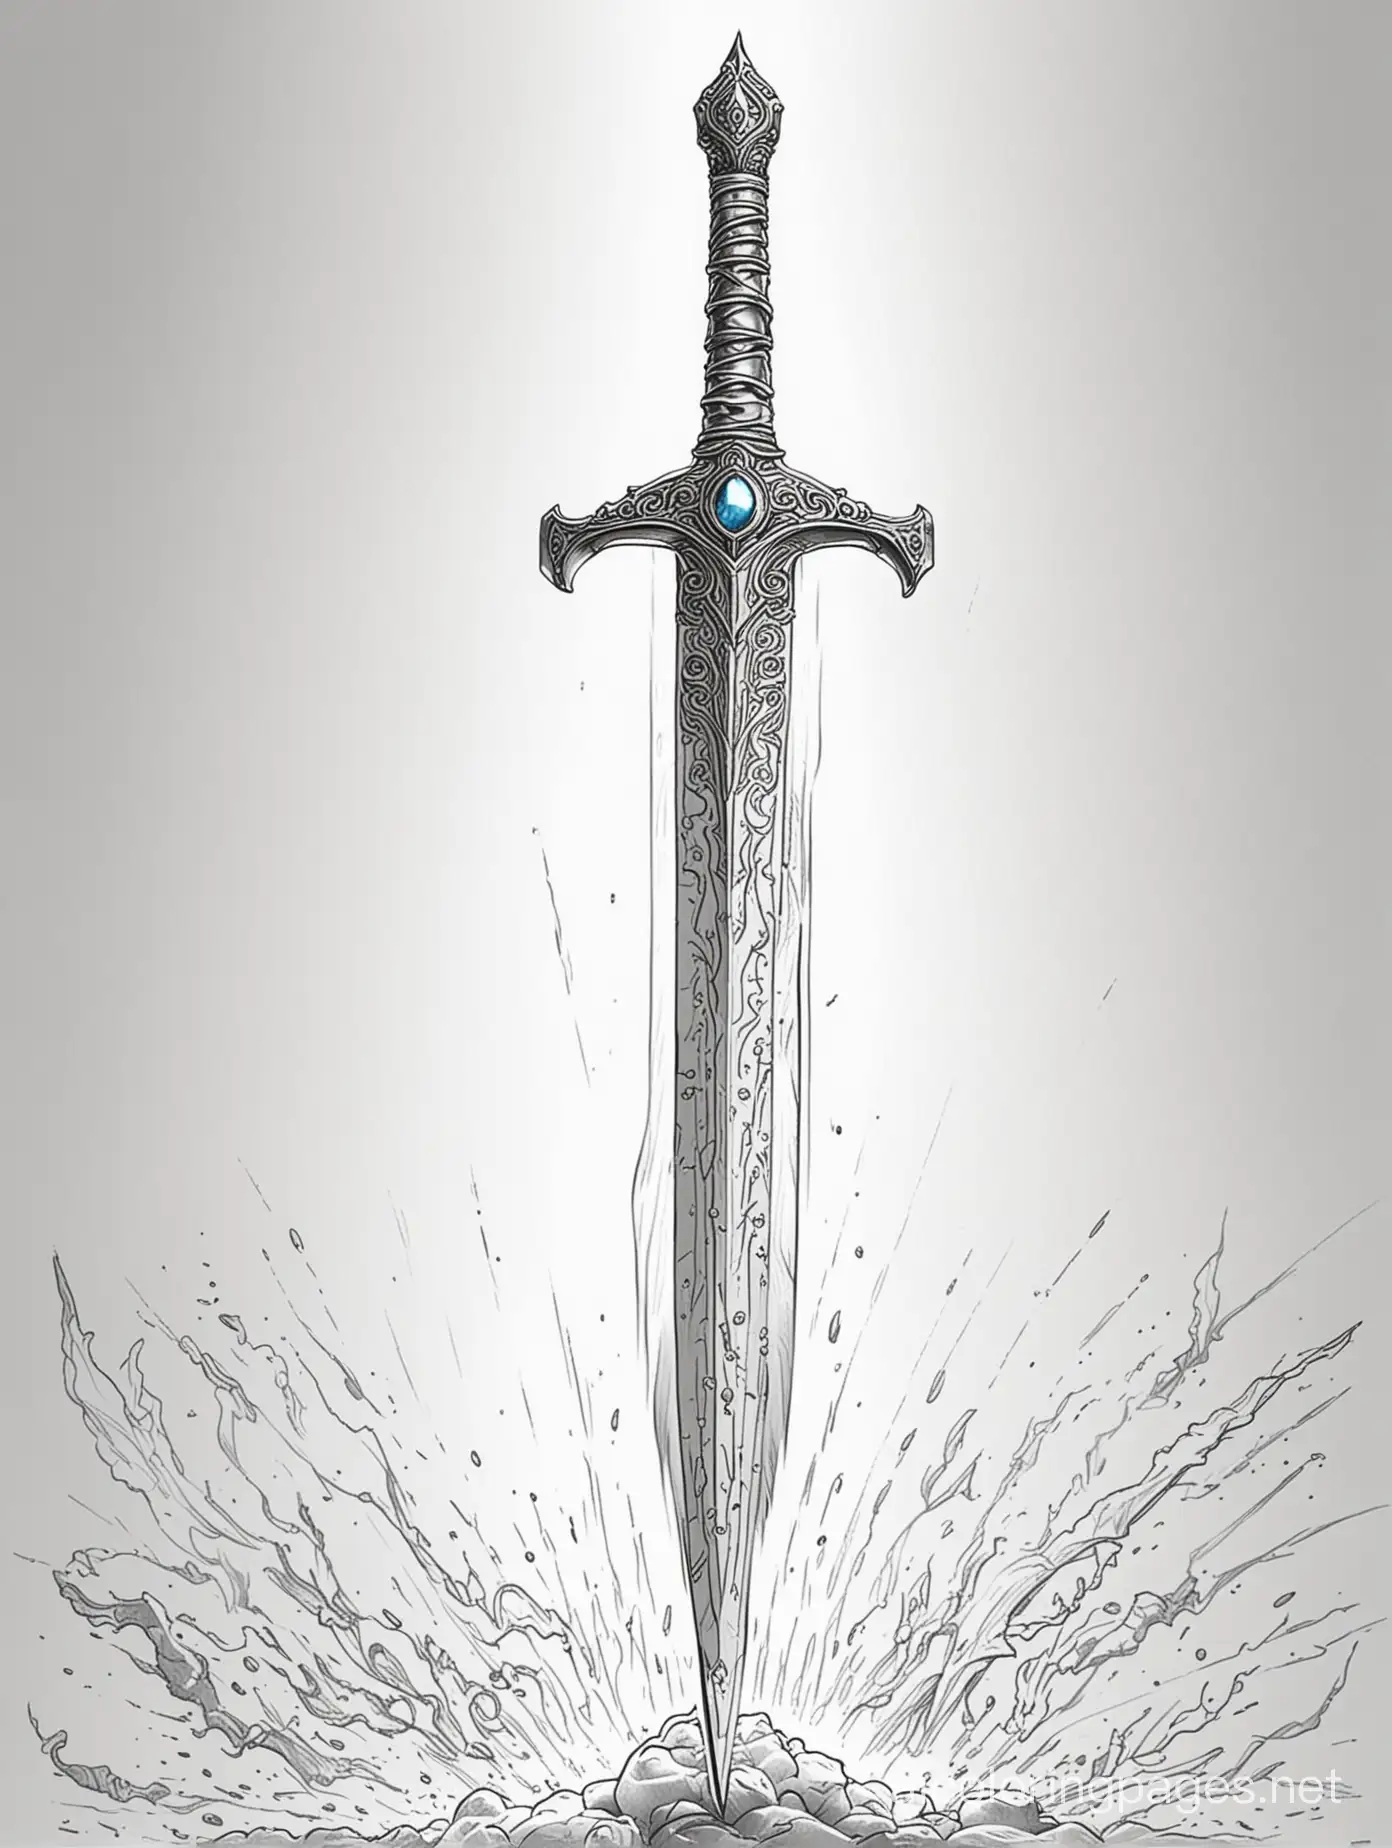 a bright heavely sword that is shinning forth bright light as it cuts through dreadful darkness, Coloring Page, black and white, line art, white background, Simplicity, Ample White Space. The background of the coloring page is plain white to make it easy for young children to color within the lines. The outlines of all the subjects are easy to distinguish, making it simple for kids to color without too much difficulty